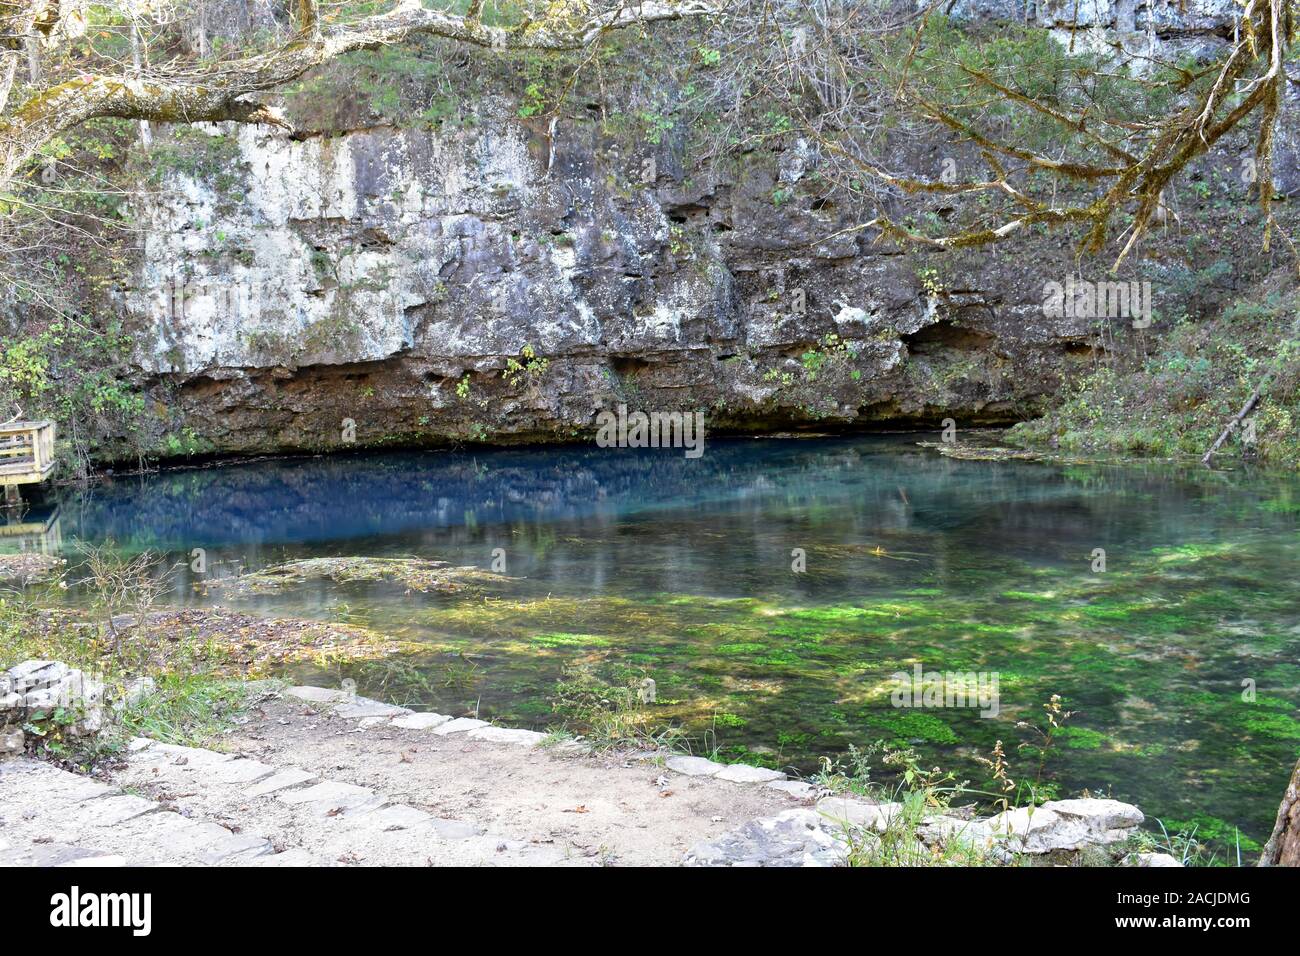 The deep blue waters of Blue Spring, on the Current River, near Eminence, MO, USA. Blue Spring is one of Missouri's deepest springs, at over 300 feet. Stock Photo